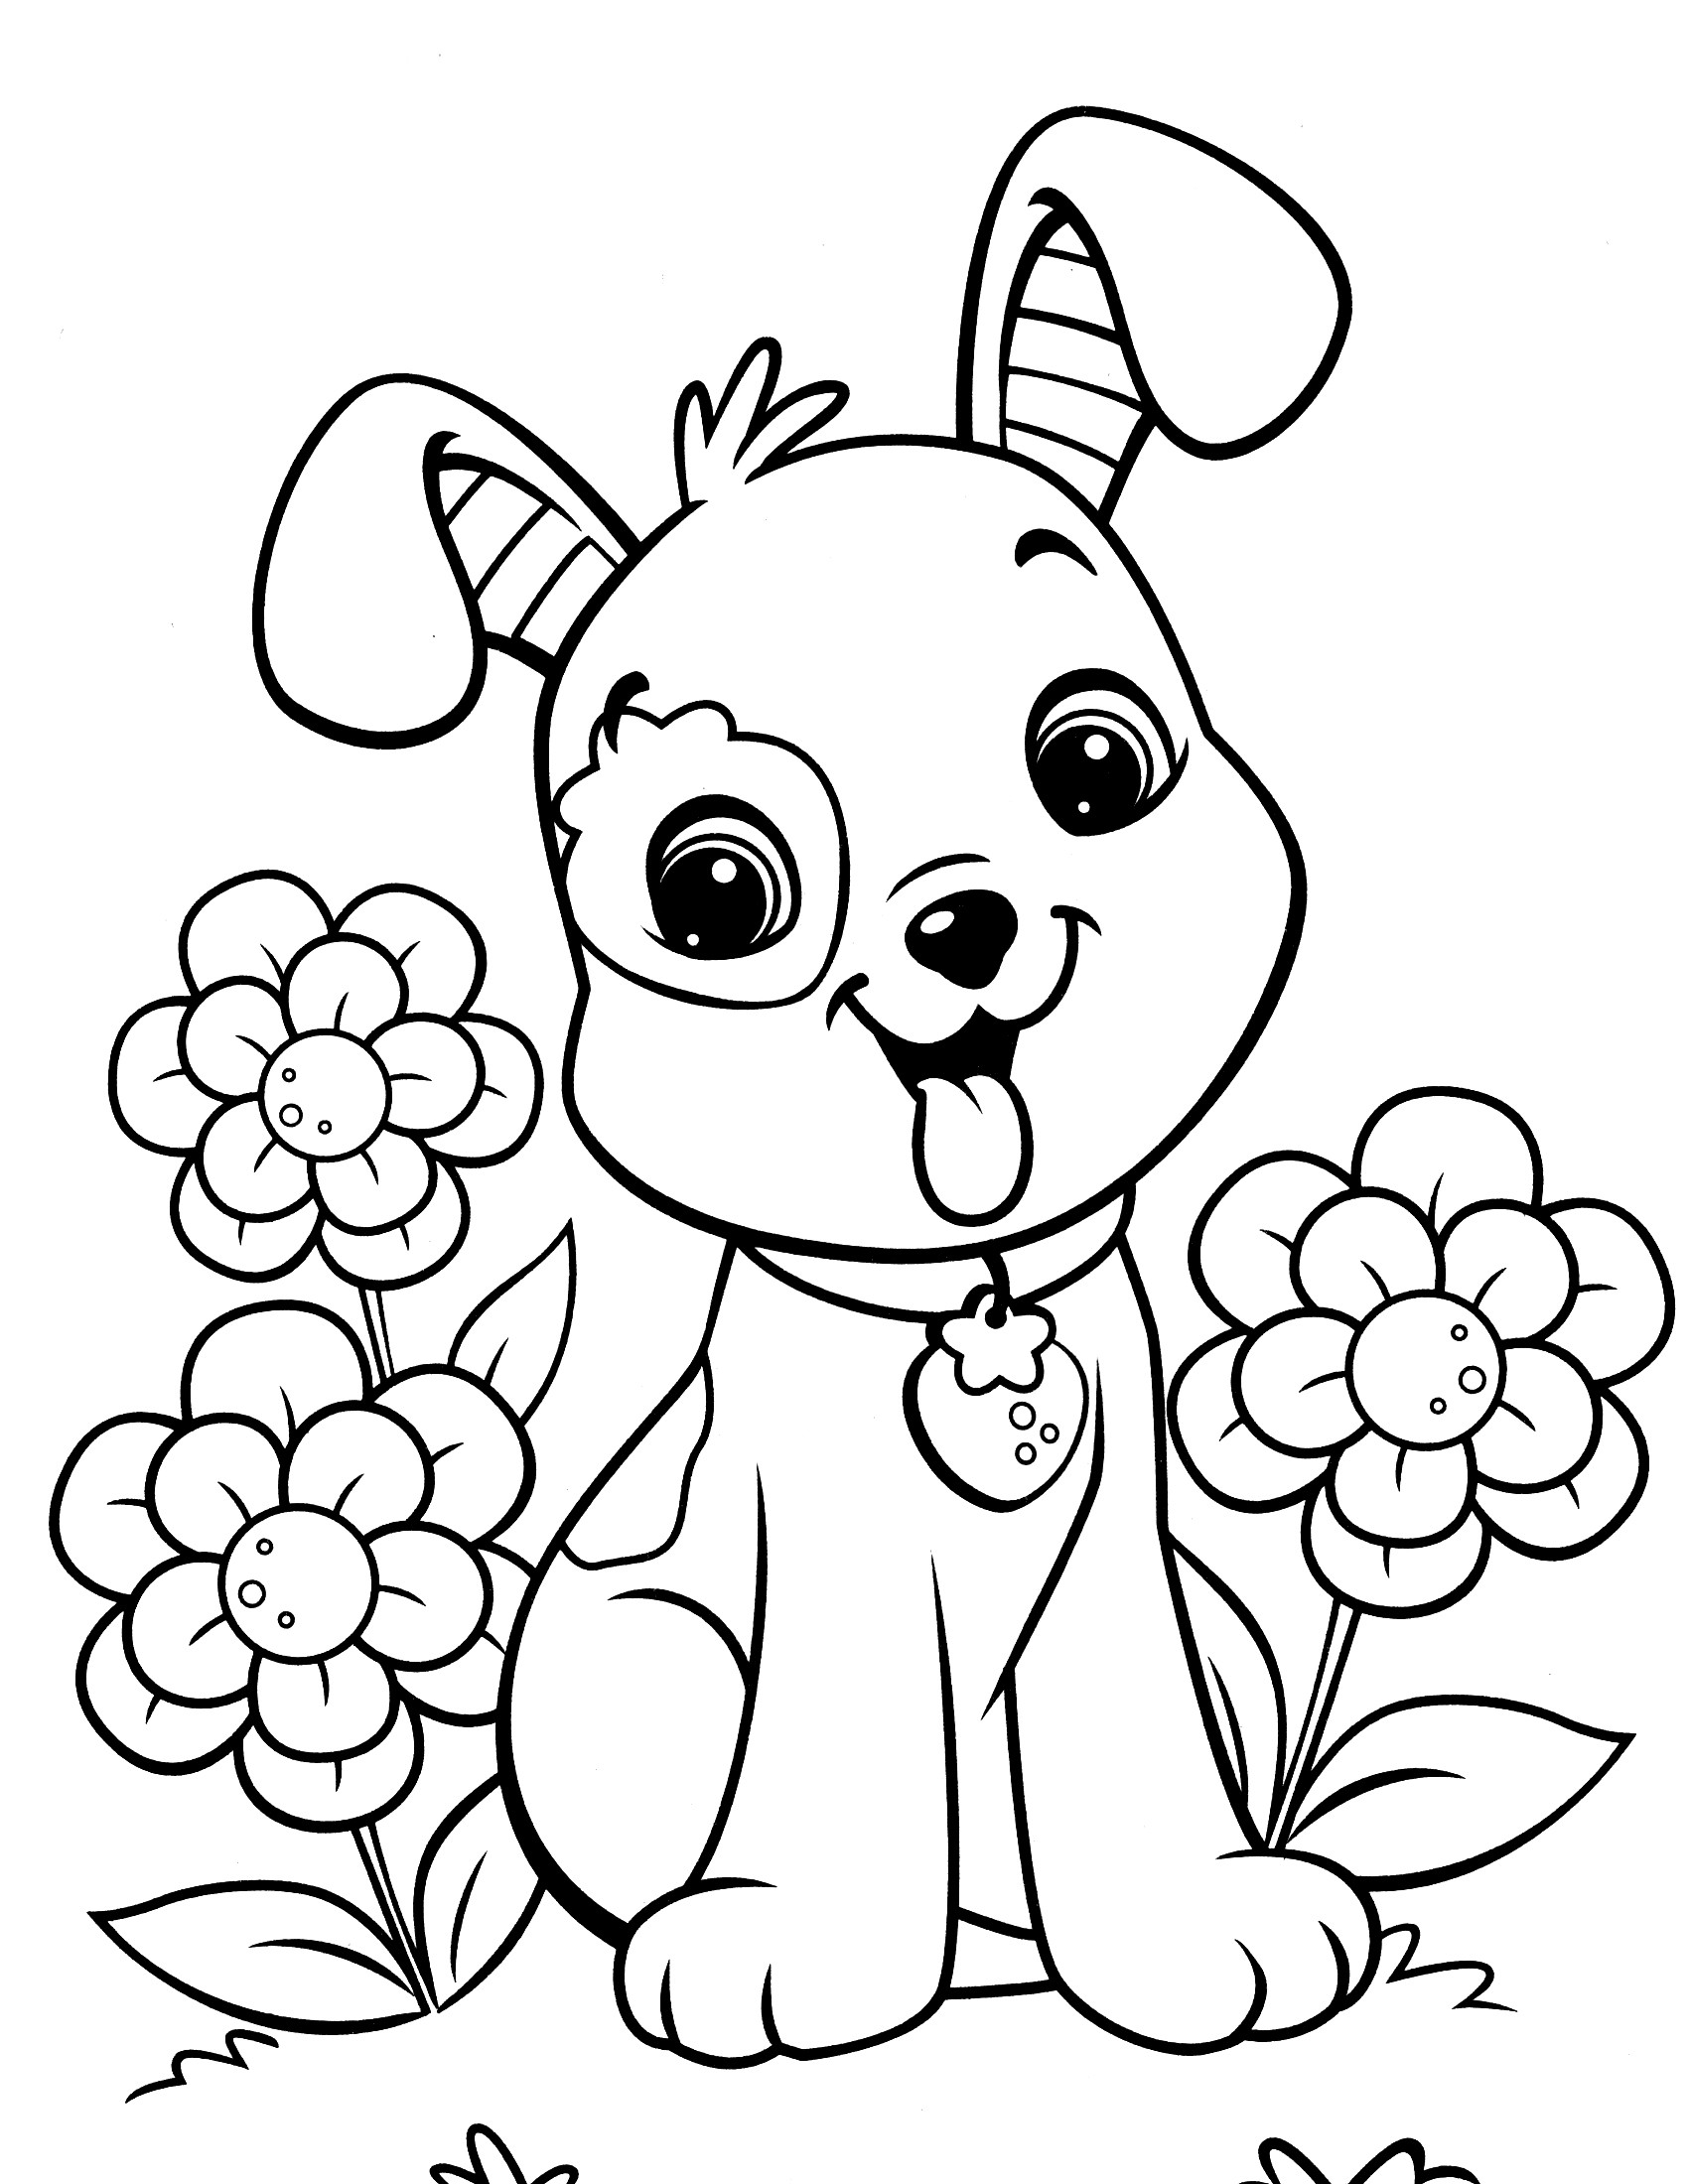 Free Printable Dog Coloring Pages
 Puppy Coloring Pages Best Coloring Pages For Kids